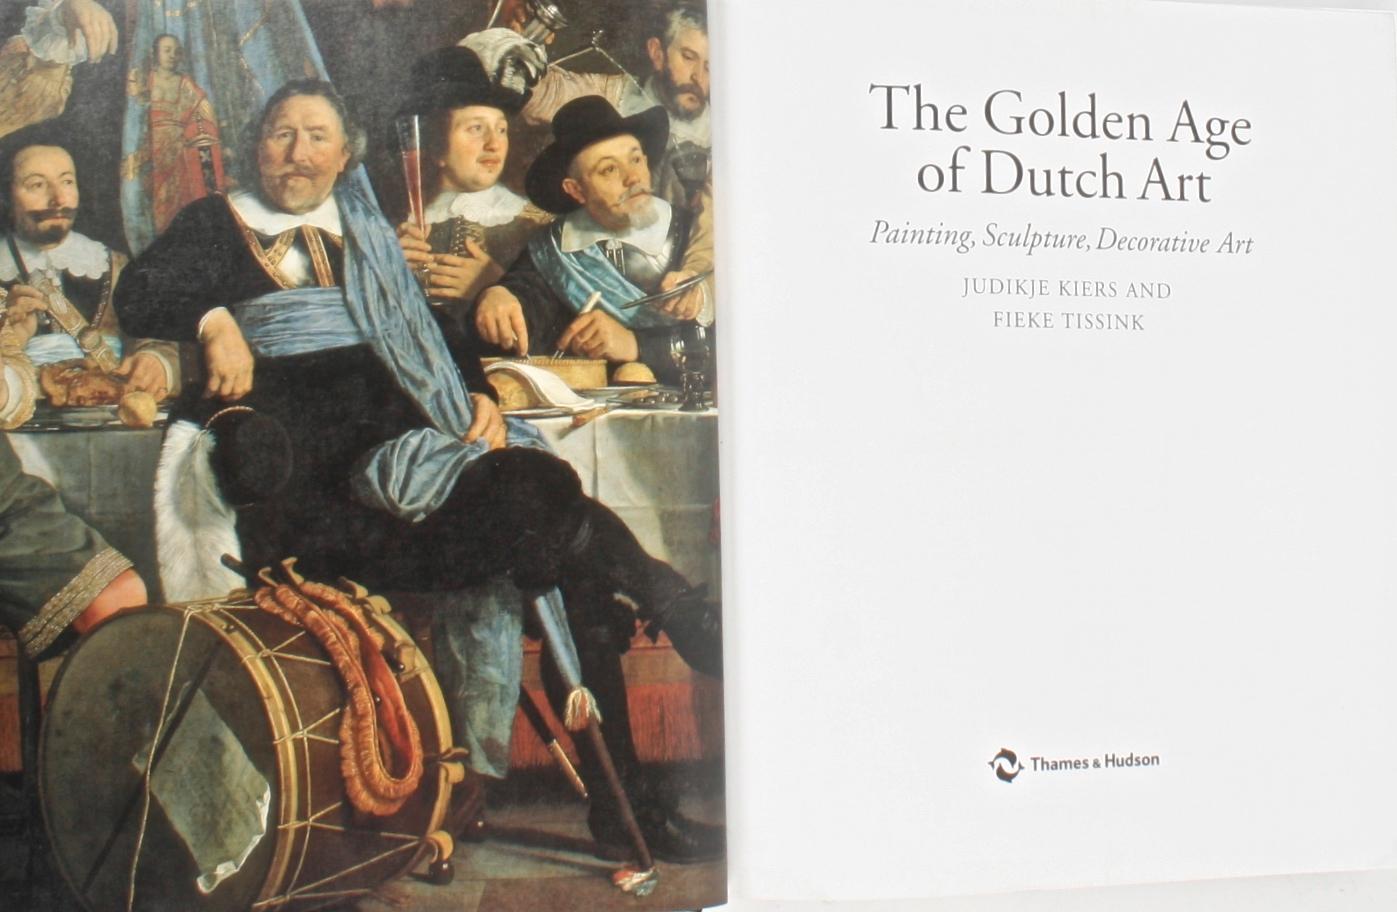 The Golden Age of Dutch Art, Painting, Sculpture, Decorative Art by Judikje Kiers and Fieke Tissink. London: Thames & Hudson Ltd., 2000. Hardcover with dust jacket. 366 pp. A thorough survey of the art produced in Holland in the 17th century, the